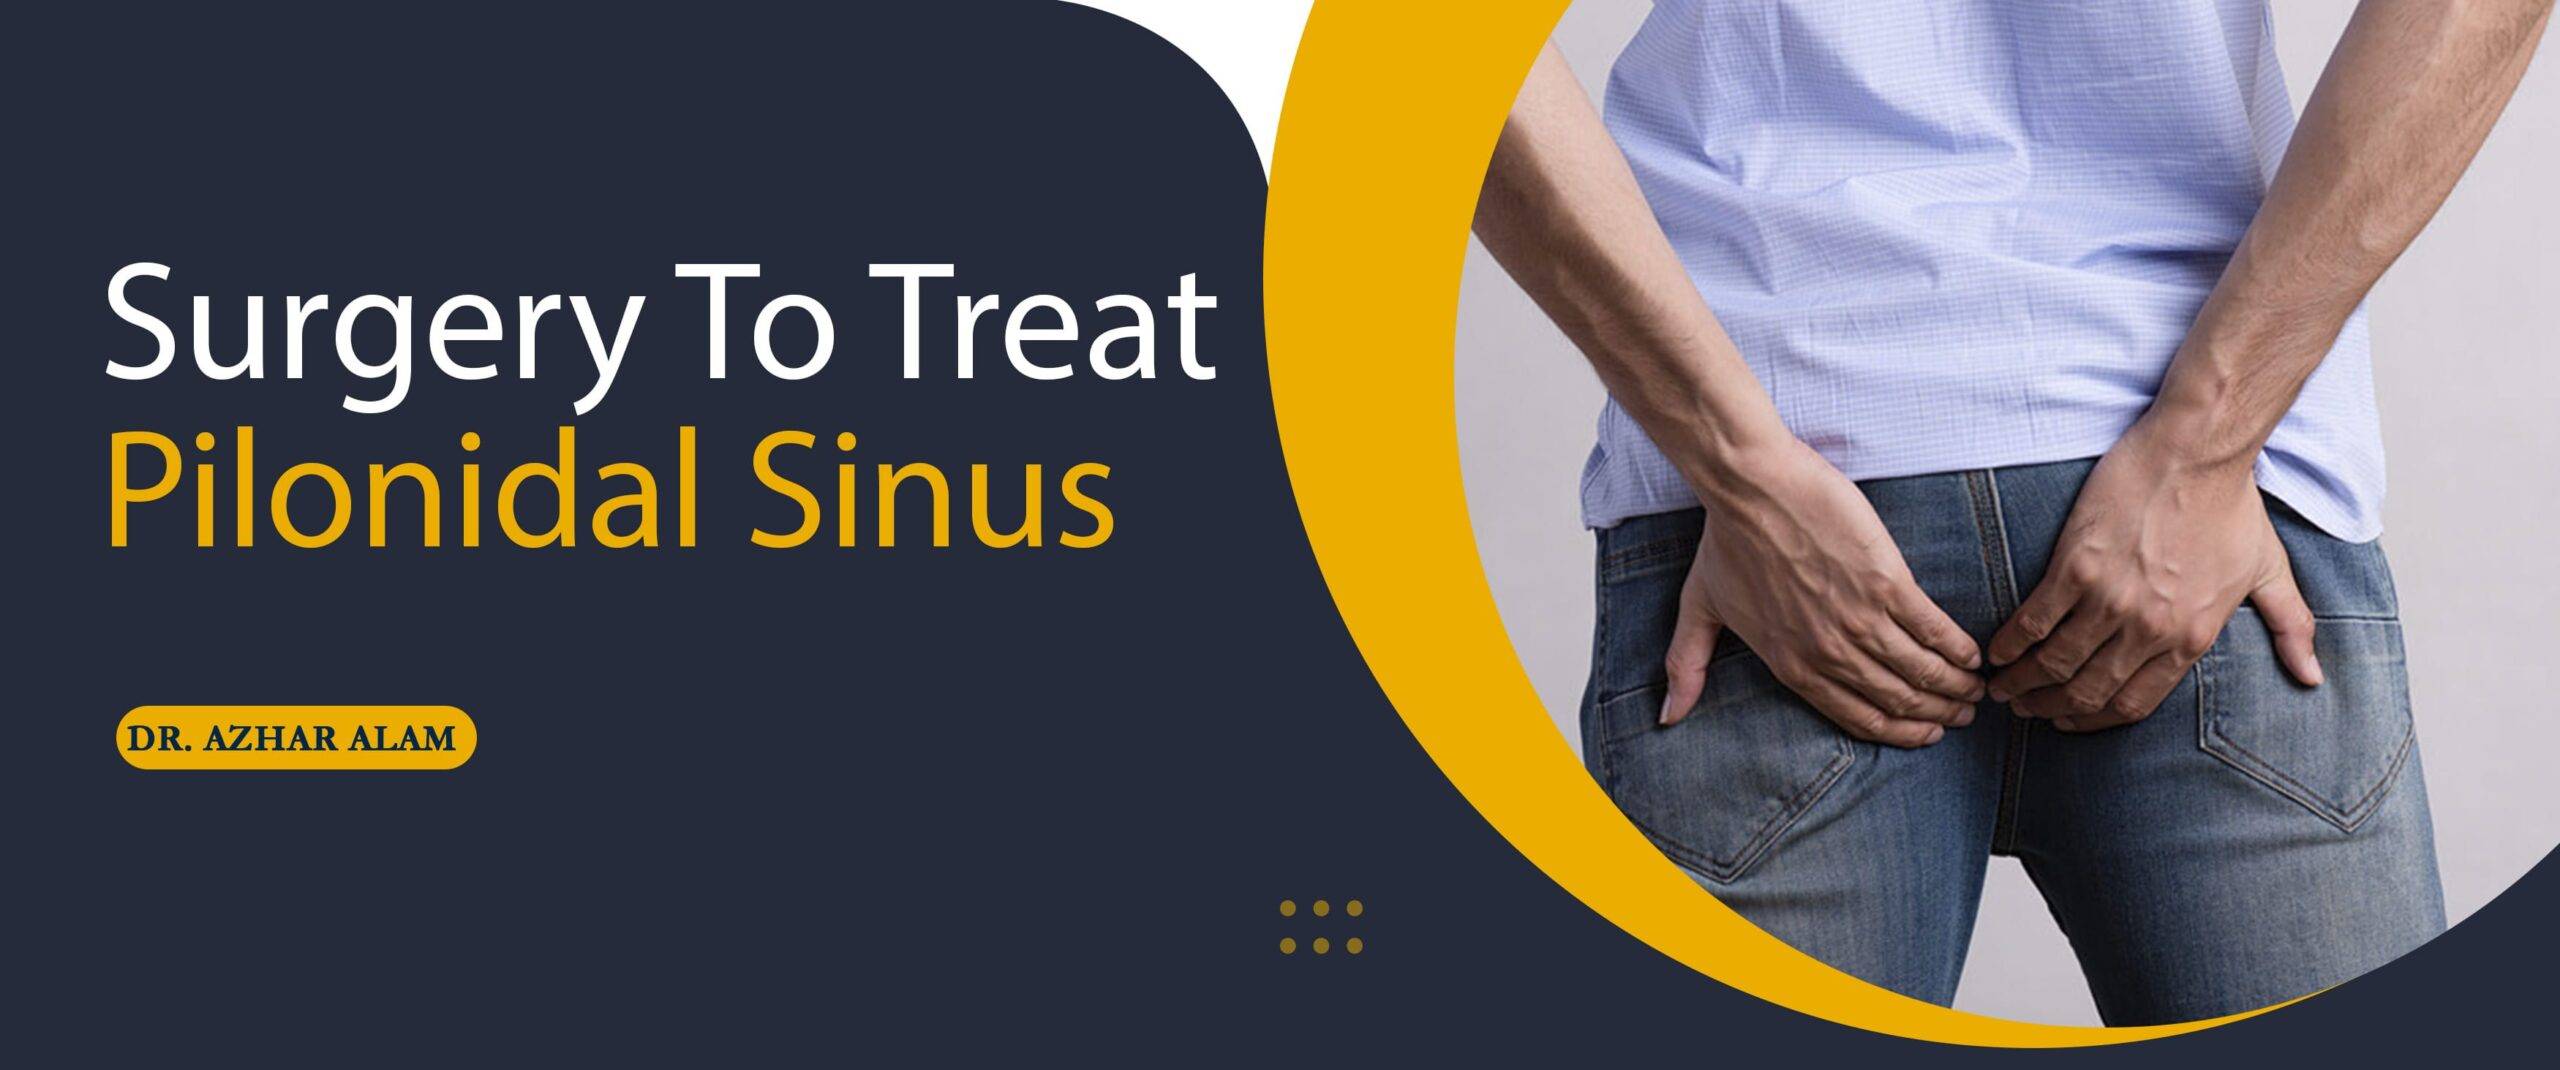 Pilonidal Sinus Infection and Surgical Treatment